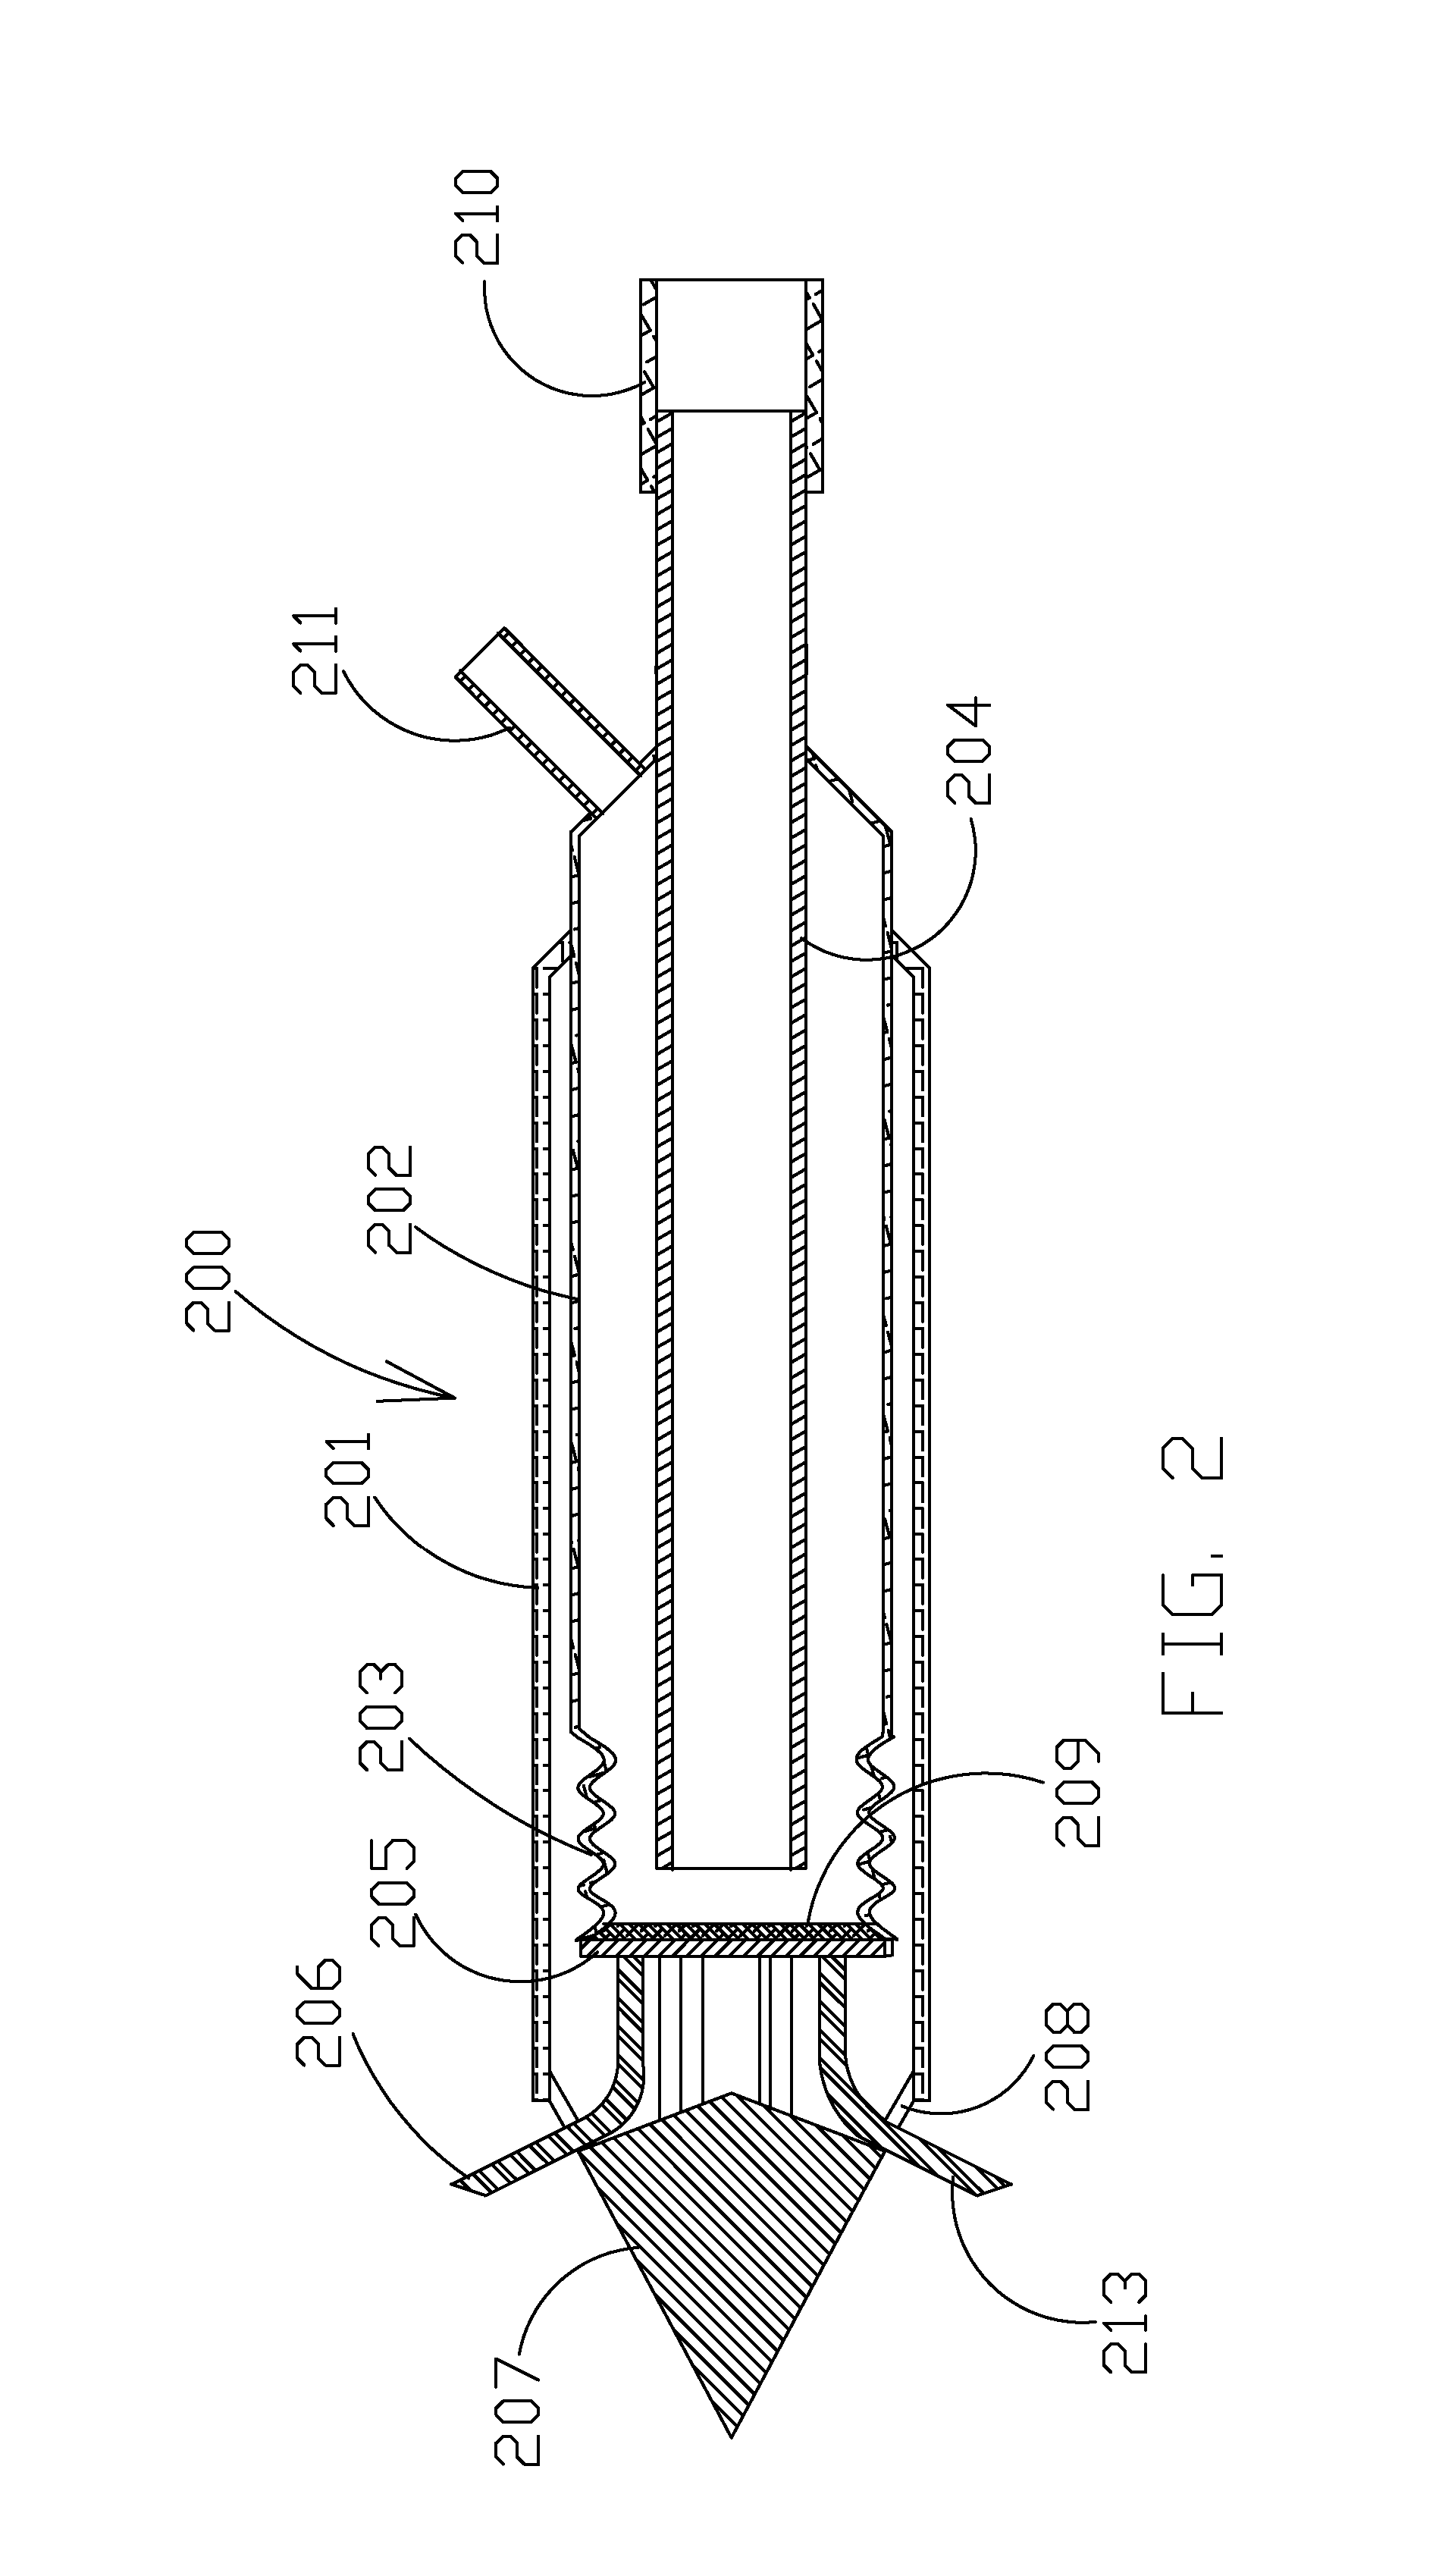 Cryogenic Probe for Treating Enlarged Volume of Tissue